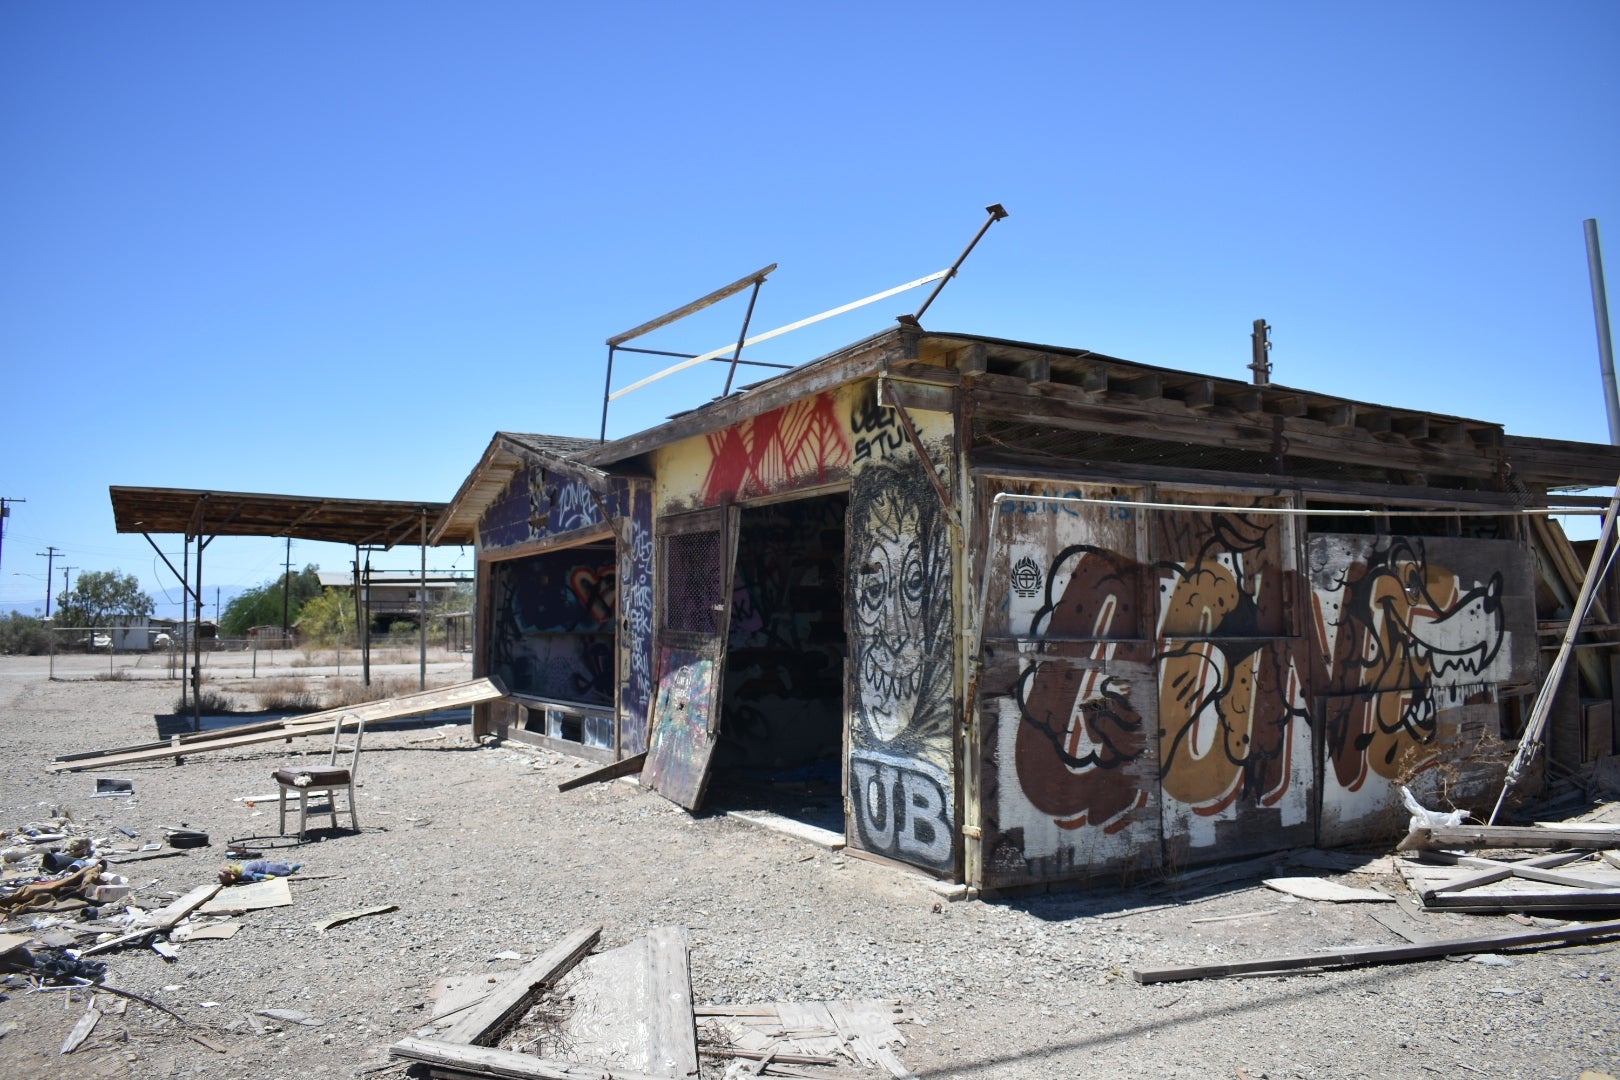 Camper submitted image from Bombay Beach  - Salton Sea State Rec Area - 5